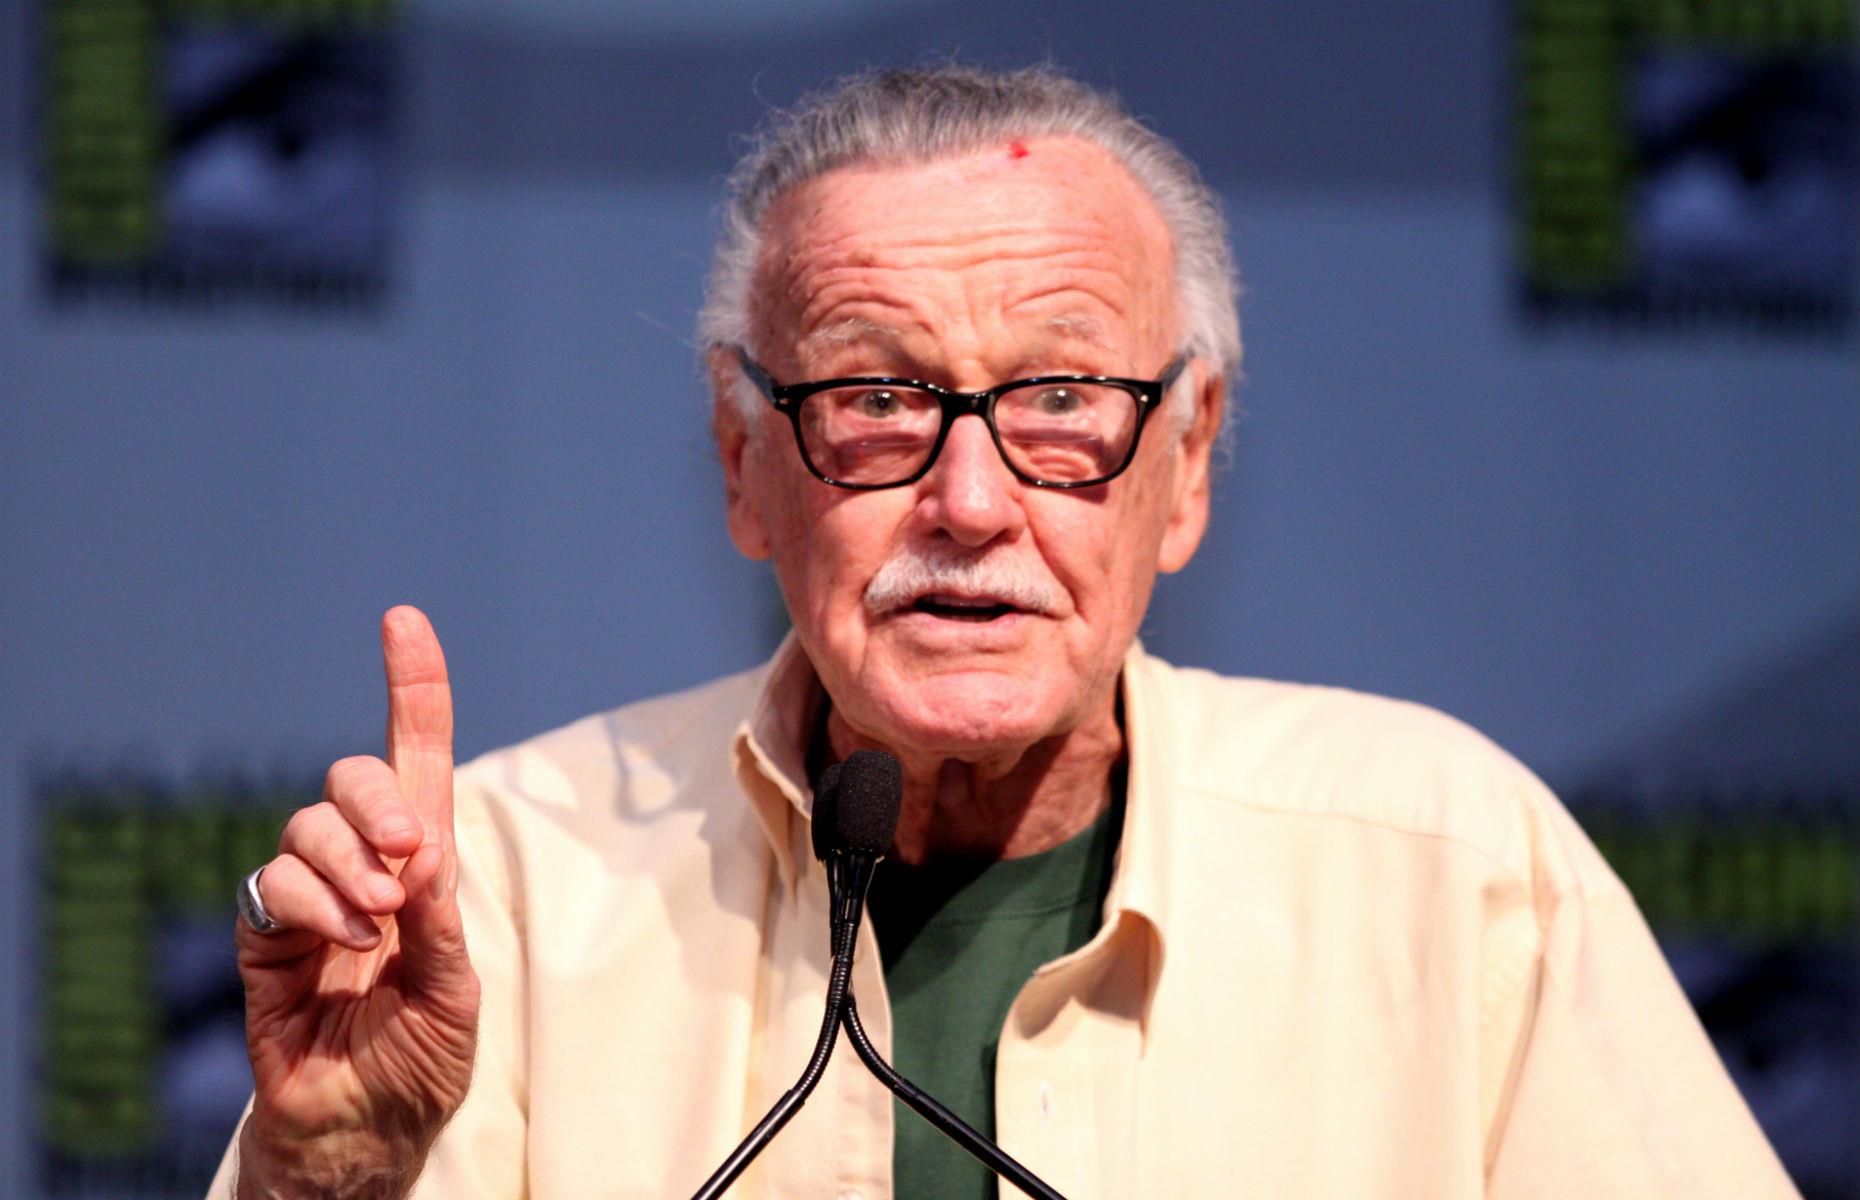 Stan Lee – age he became a millionaire: 39